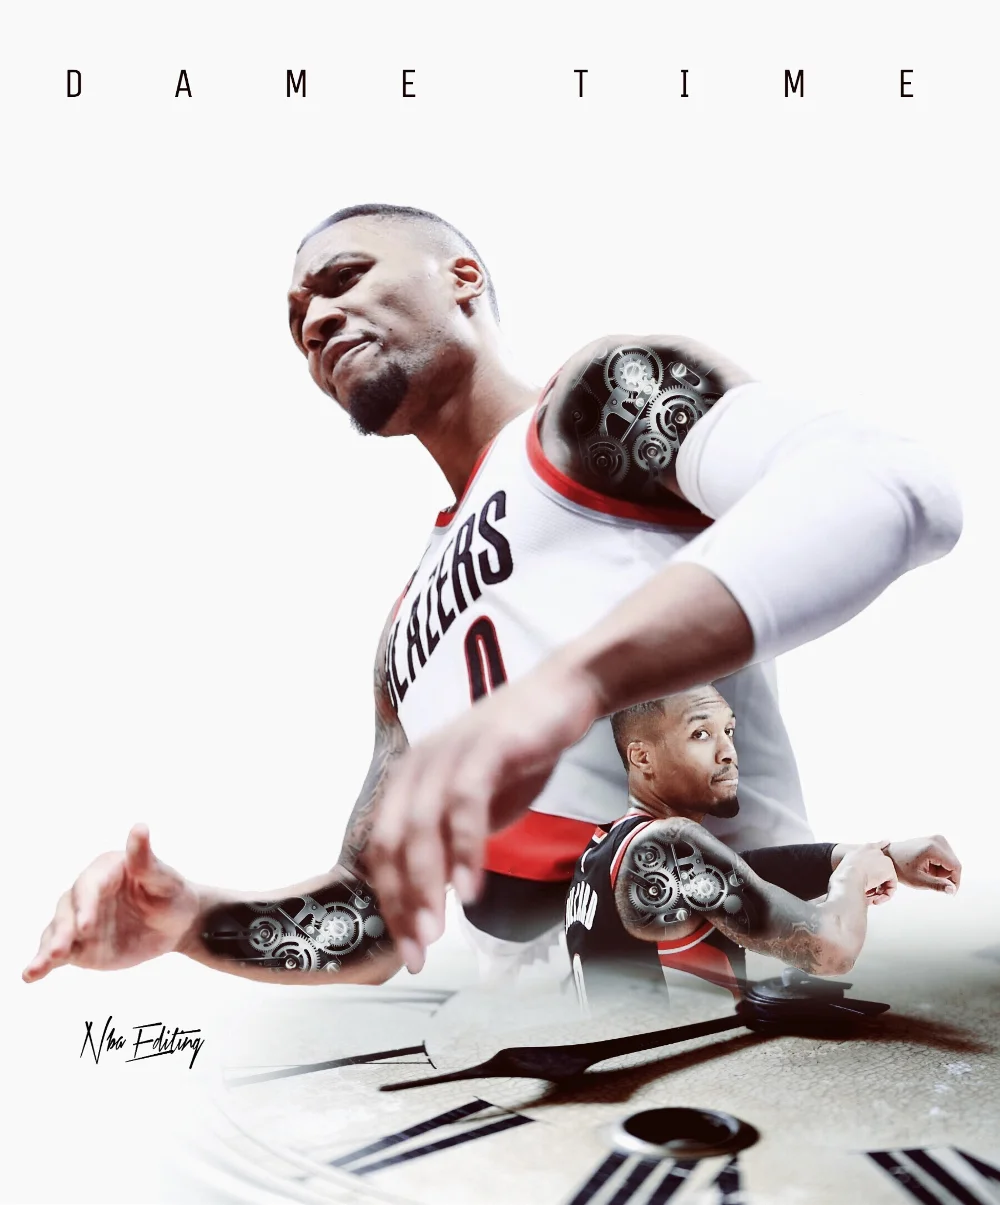 It‘s Dame Time #madewithpicsart